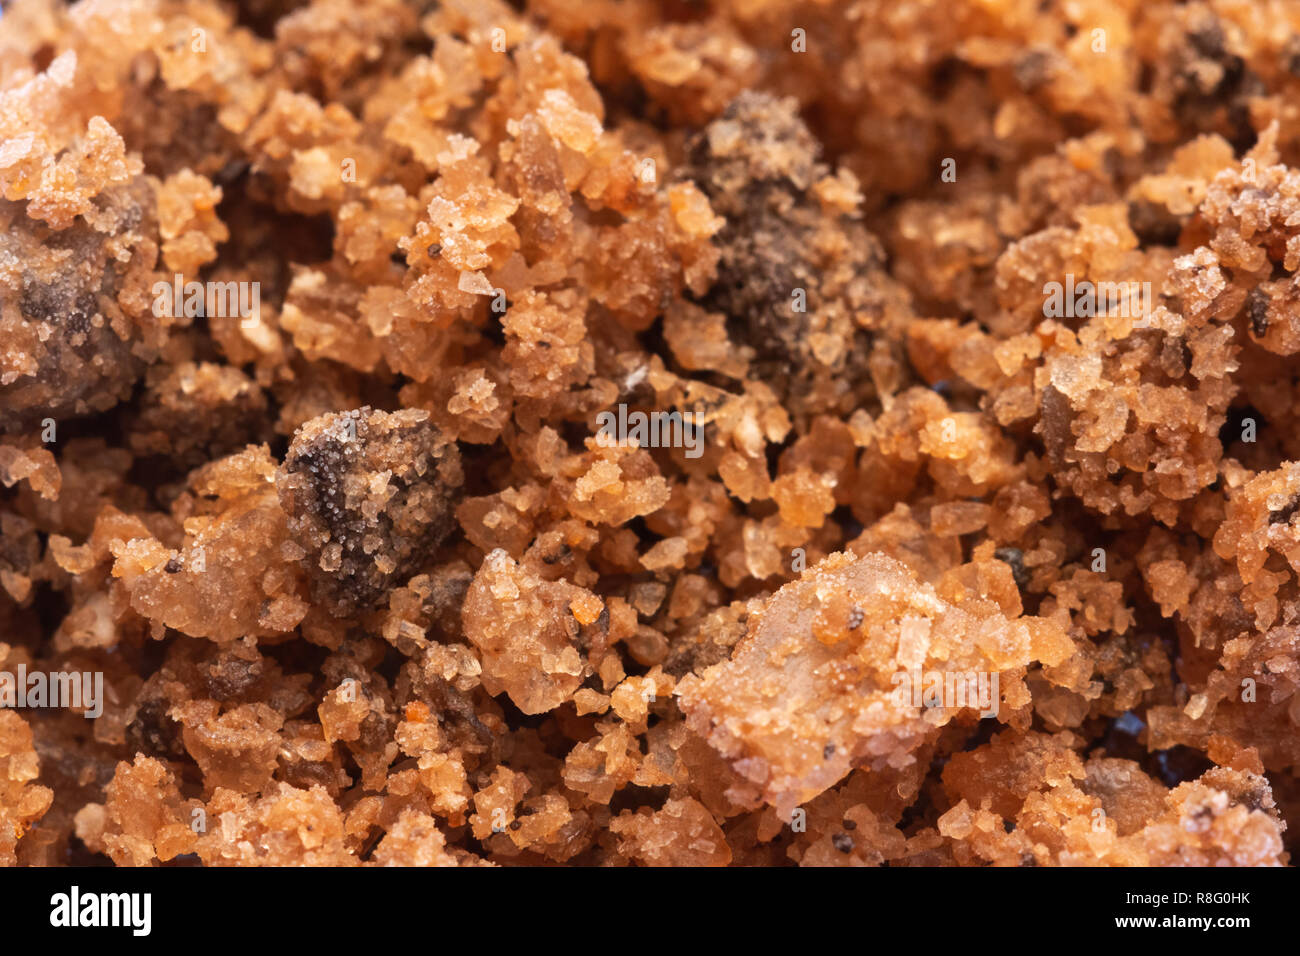 Close up of rock salt with crystals of sodium chloride. Stock Photo